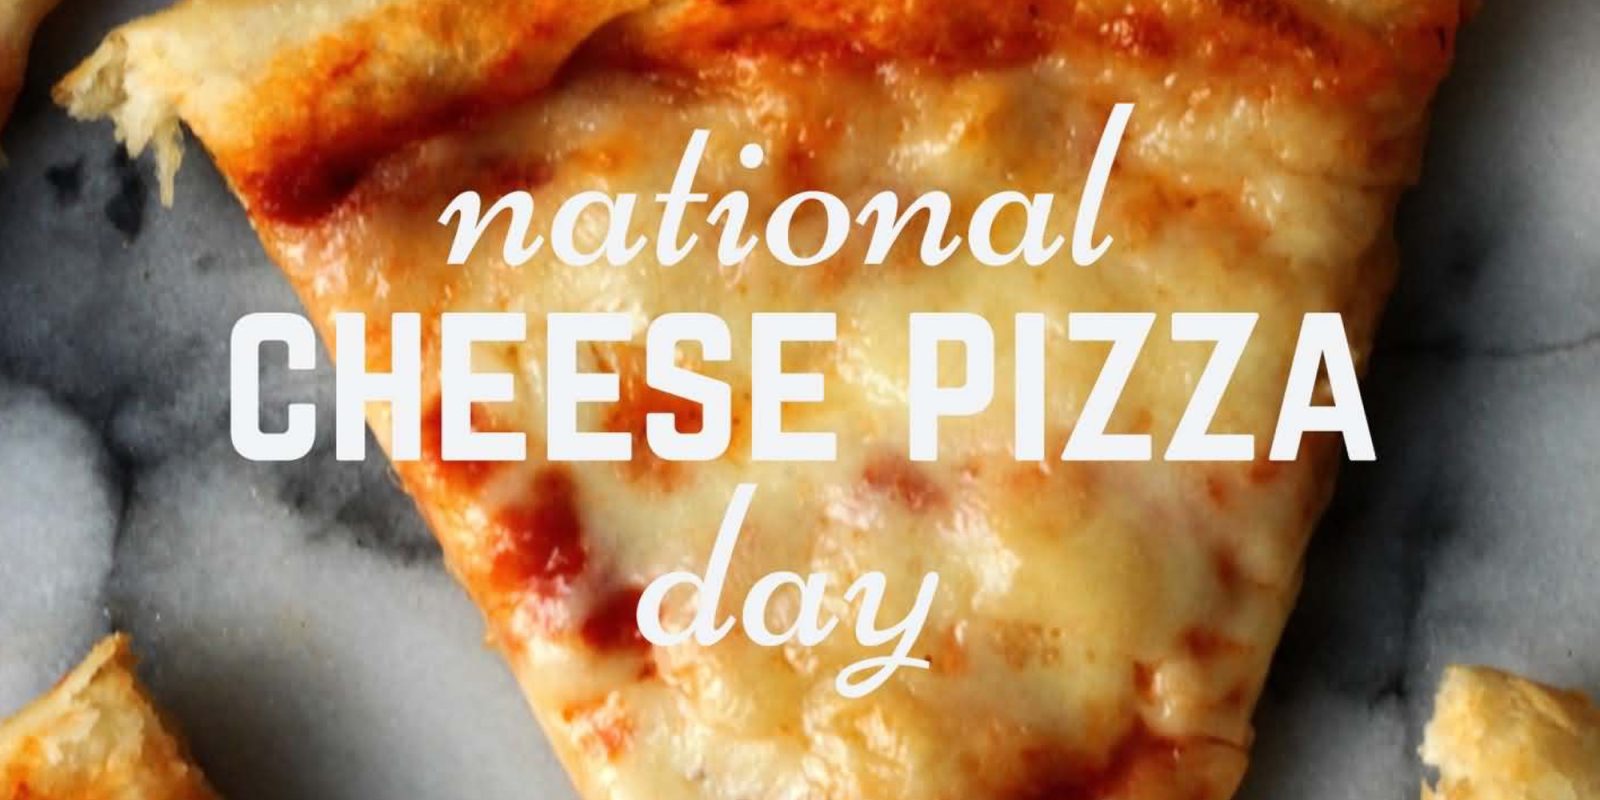 Today only get one large cheese pizza for 5 at Pizza Hut (Reg. 15